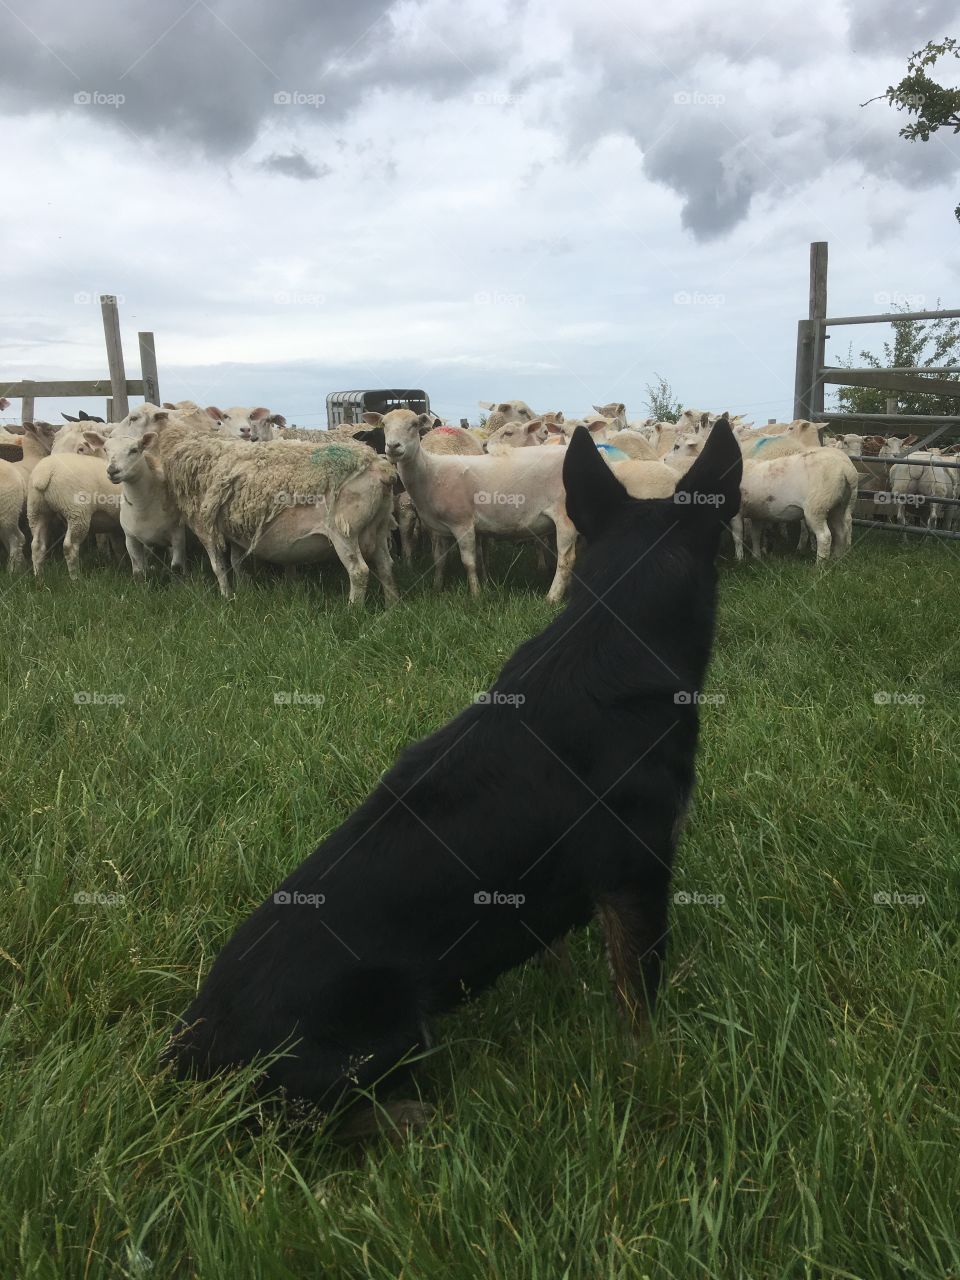 Kelpie keeping sheep in. Back view, grey skies. And grass.